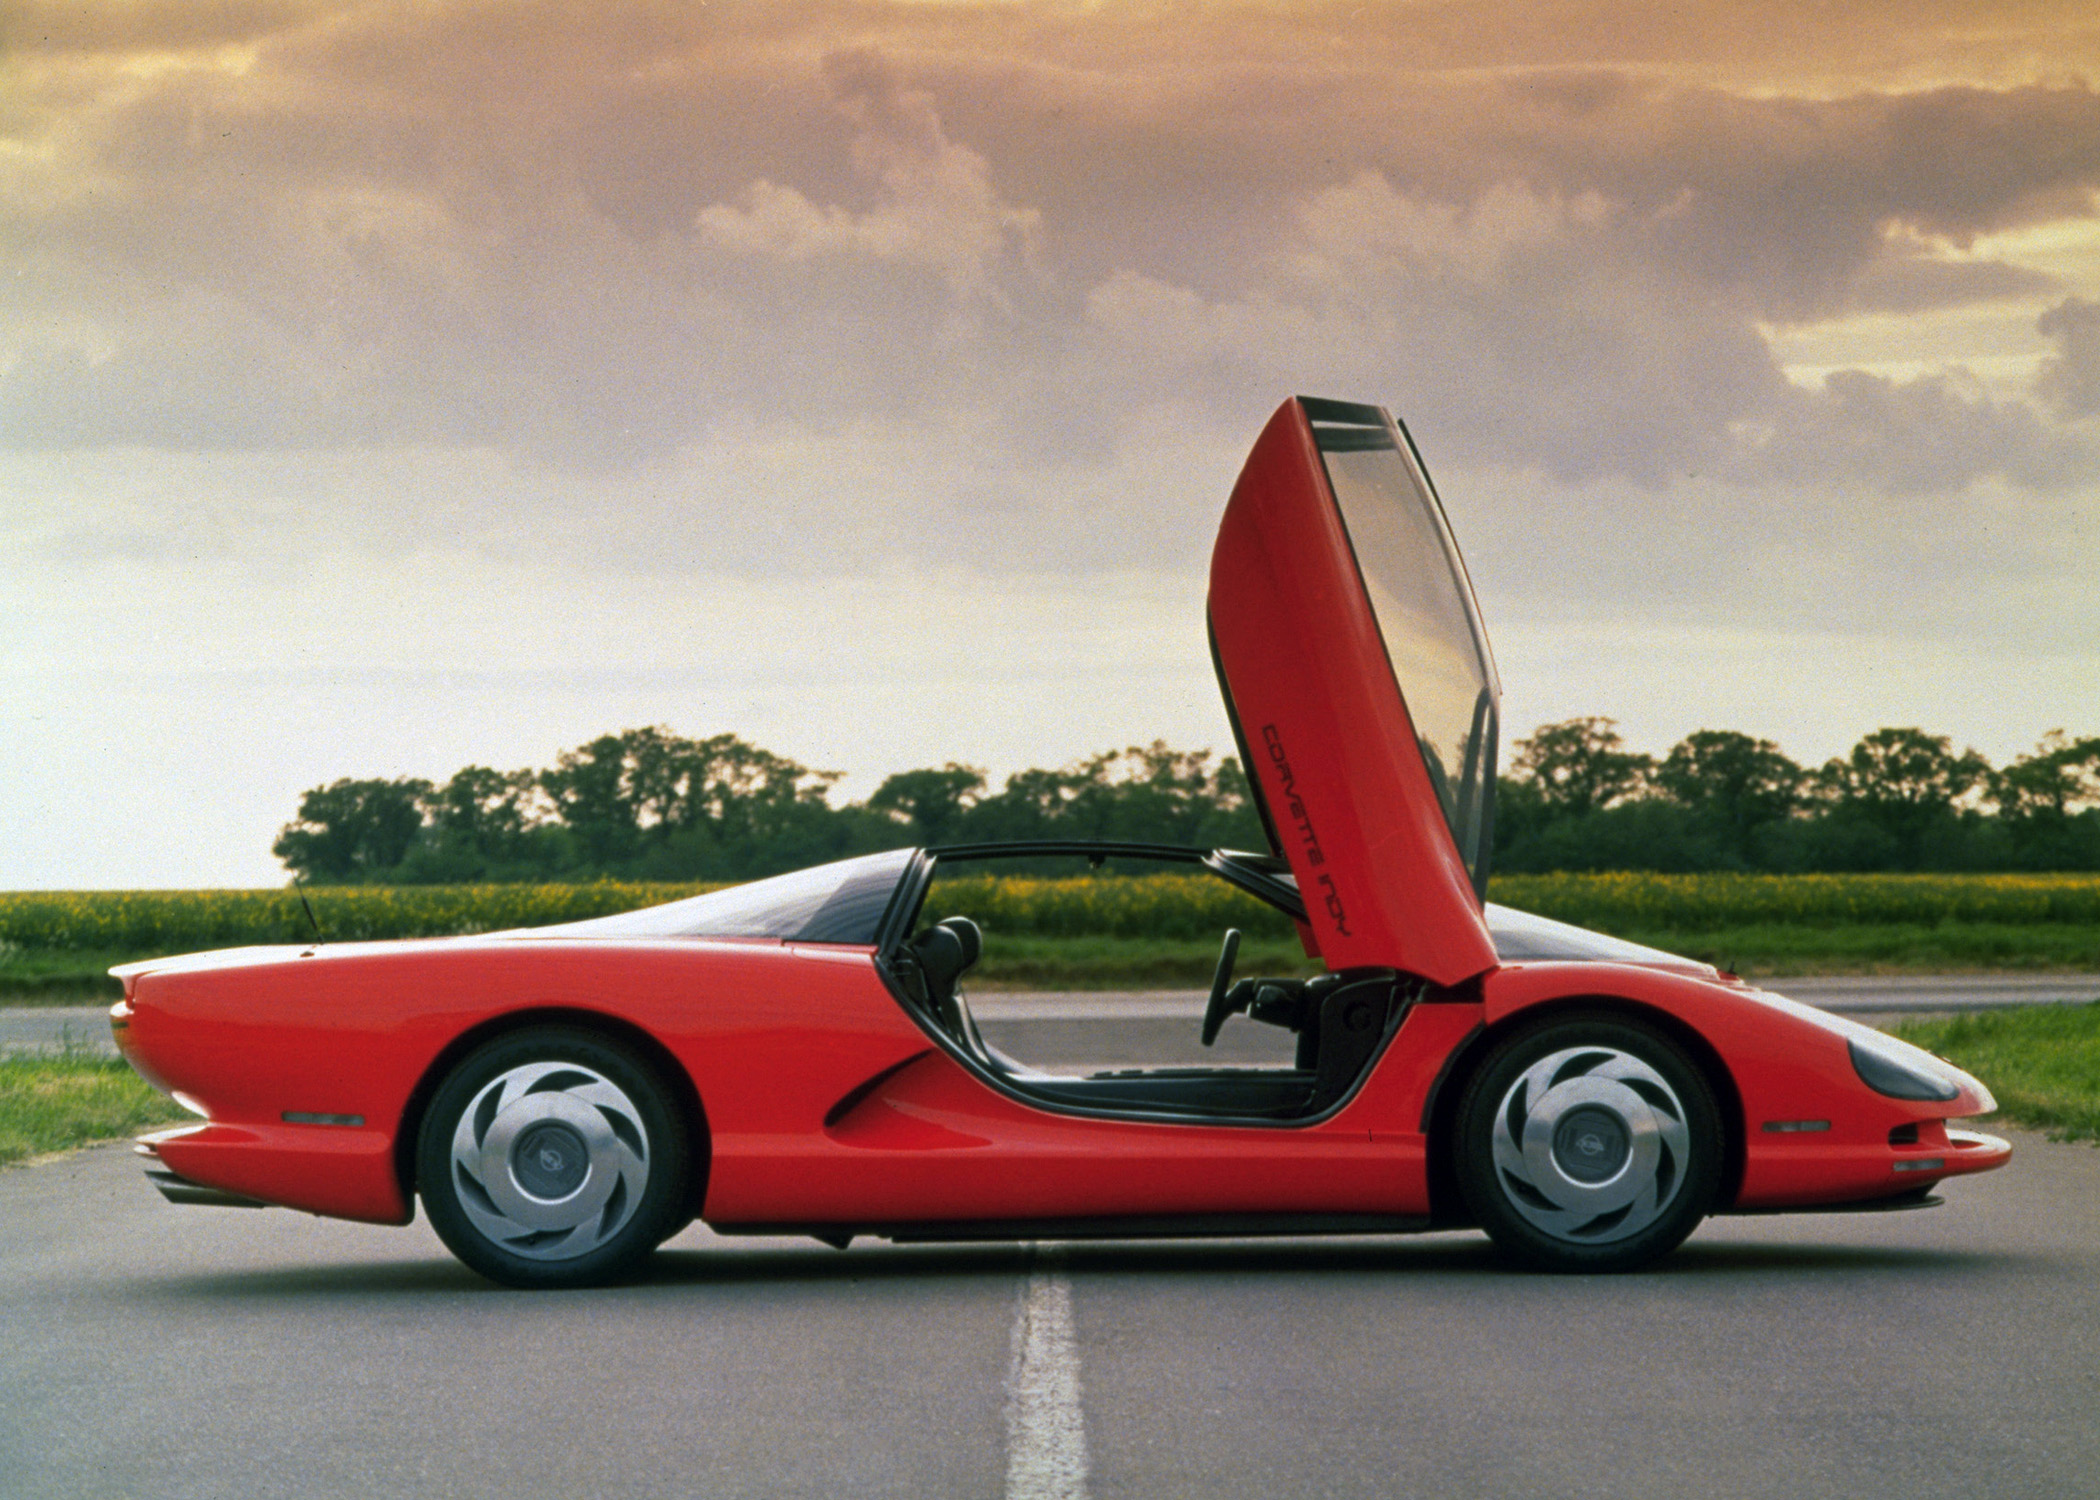 The 1986 Corvette Indy Concept vehicle was another in a series of mid-engine prototype models that paved the way for the current mid-engine Corvette.